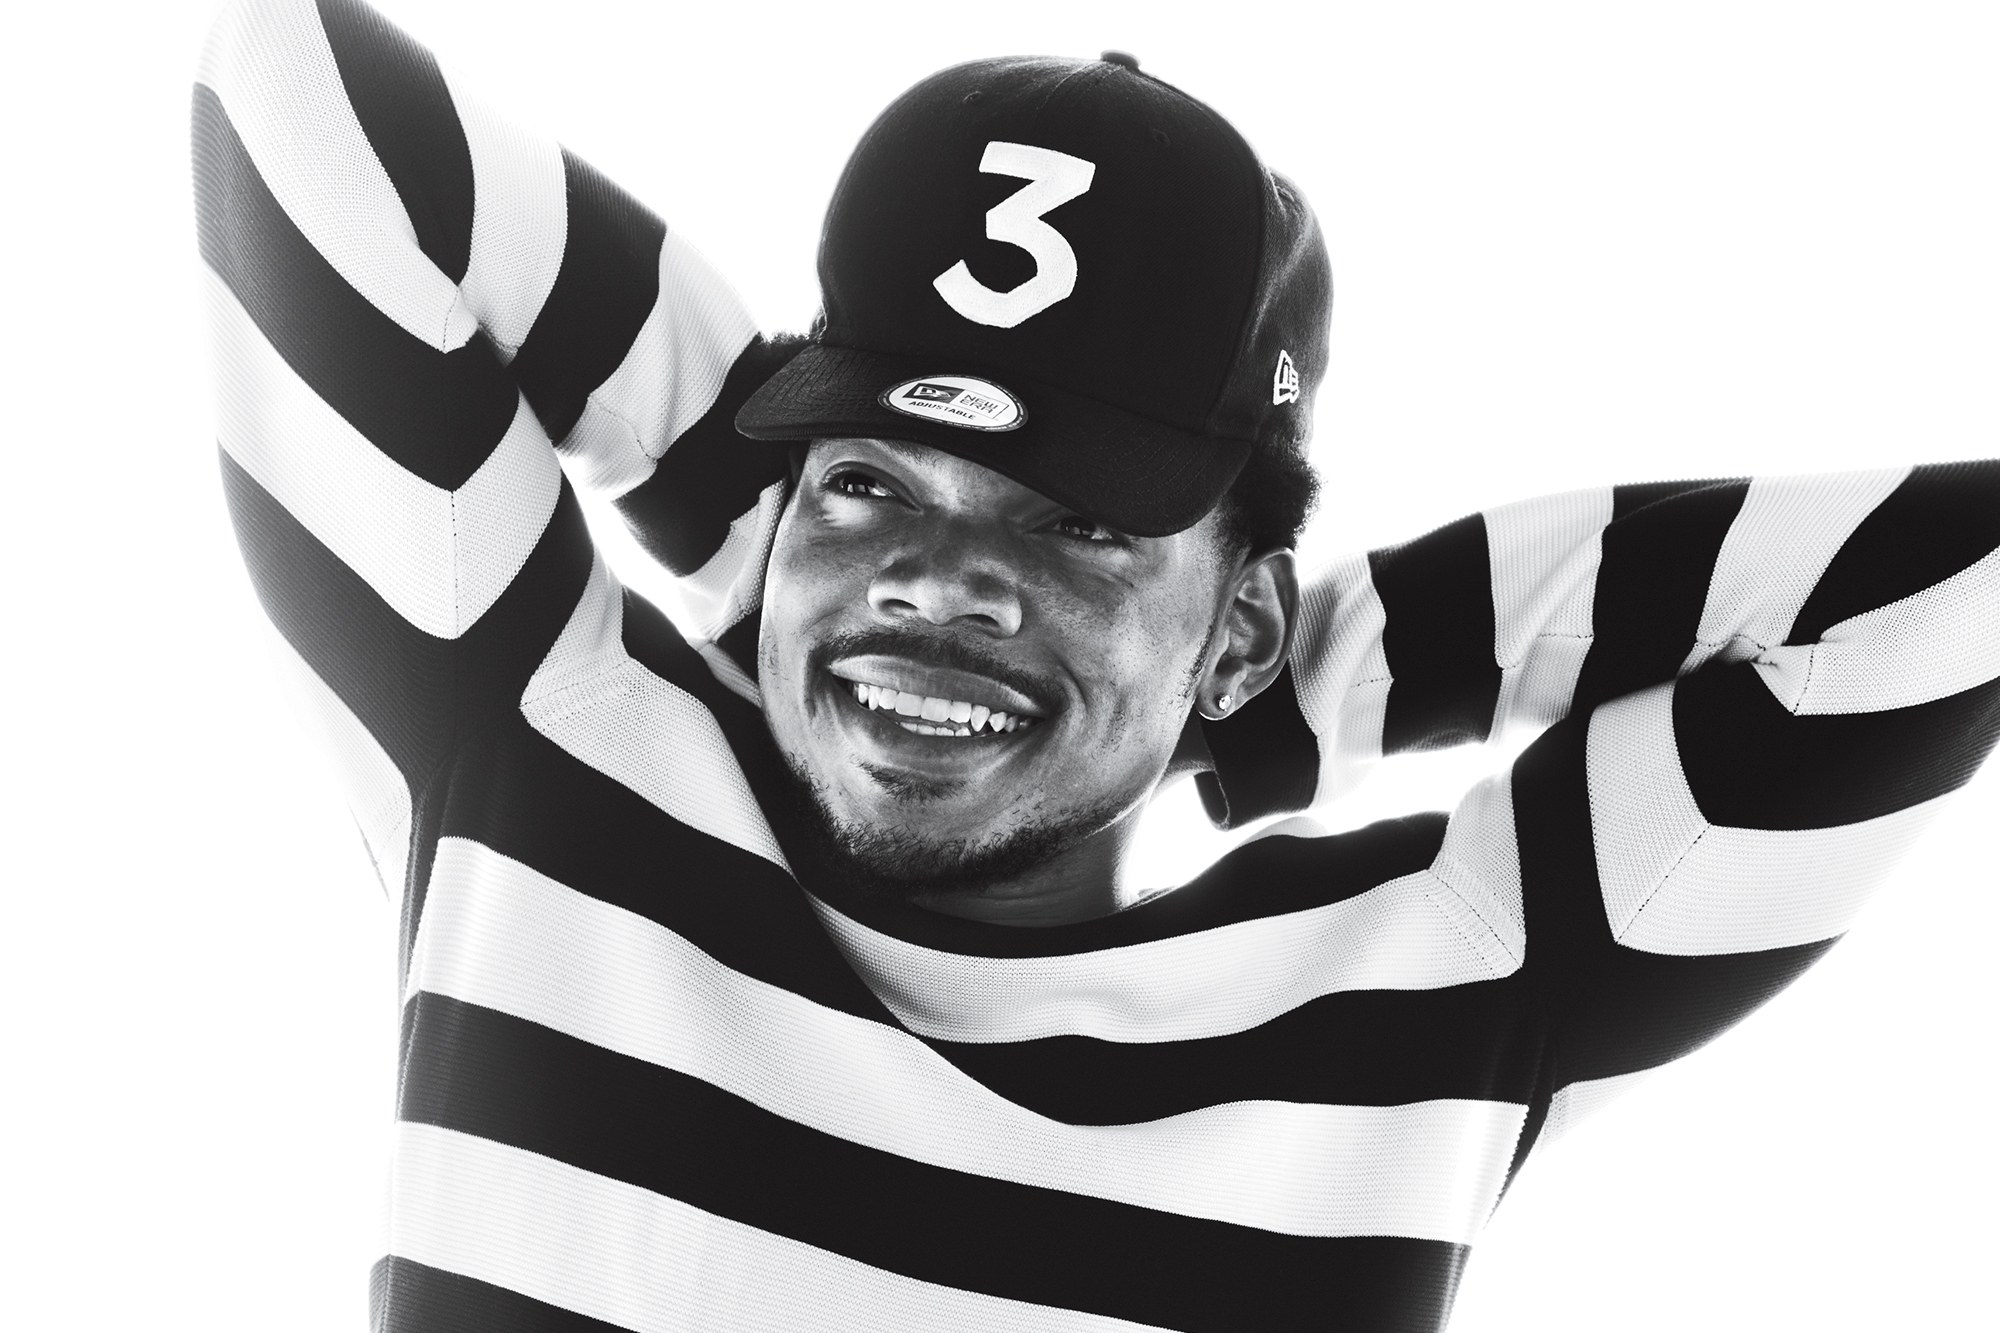 Amazing Chance The Rapper Pictures & Backgrounds